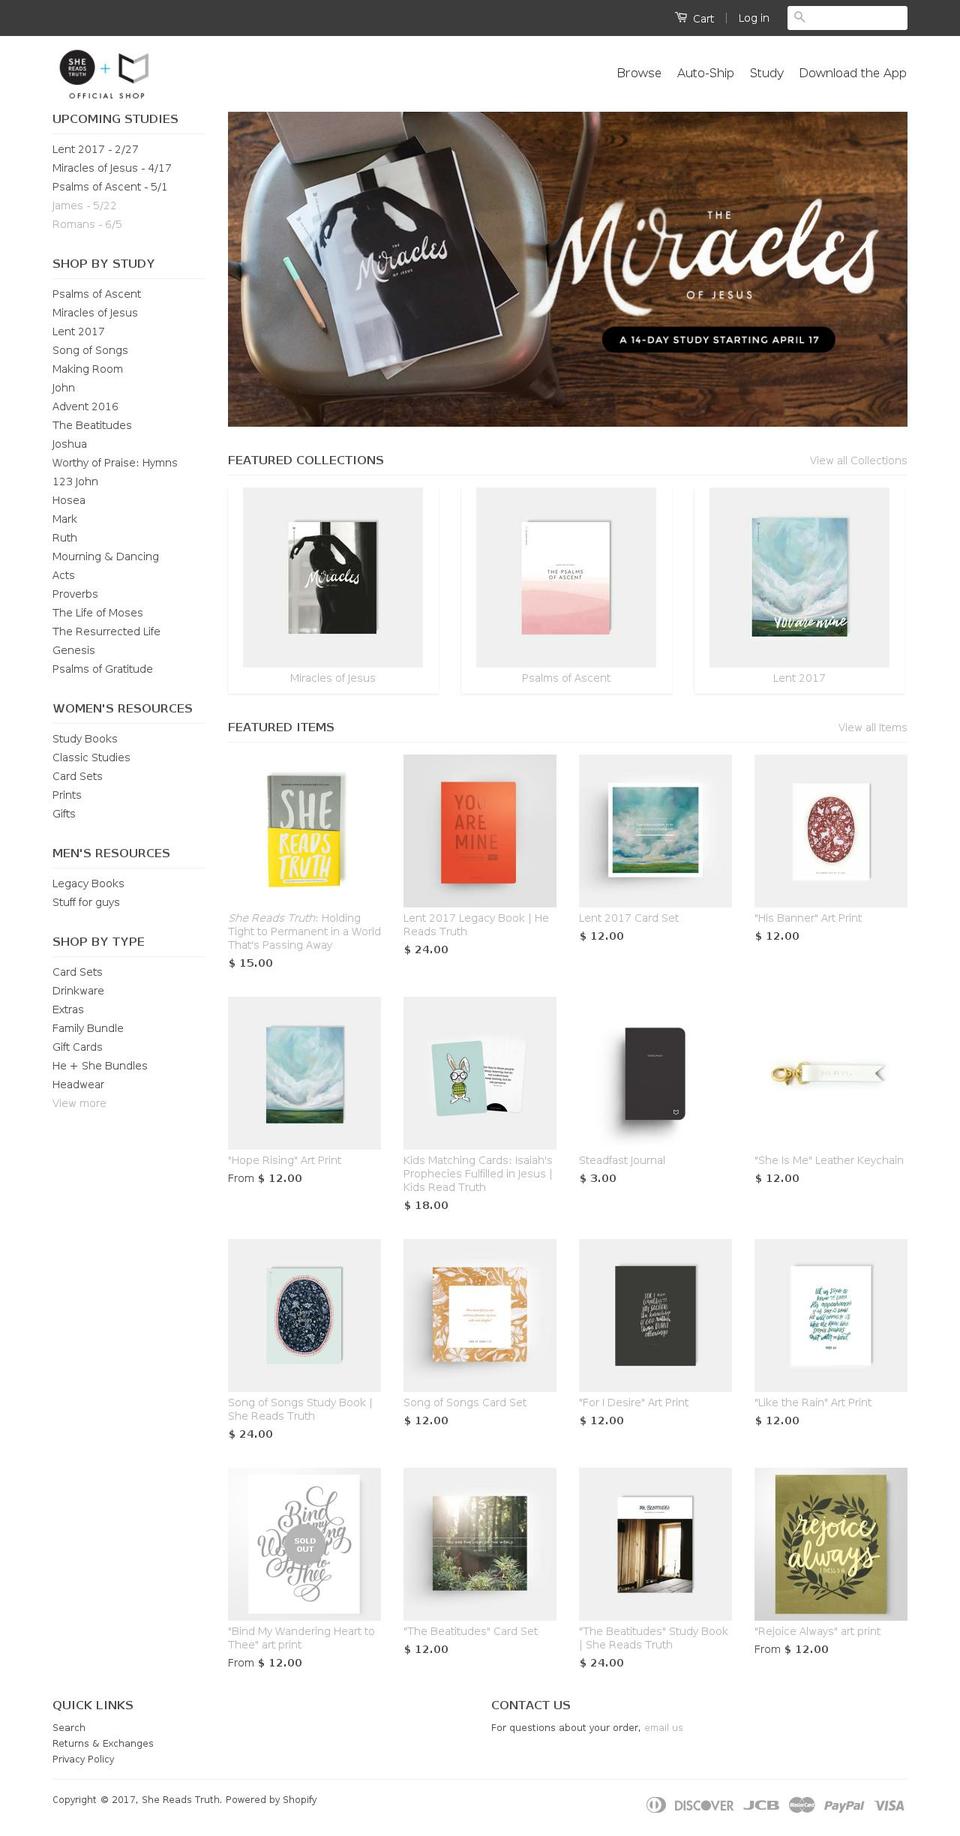 Launch Shopify theme site example shopshereadstruth.com